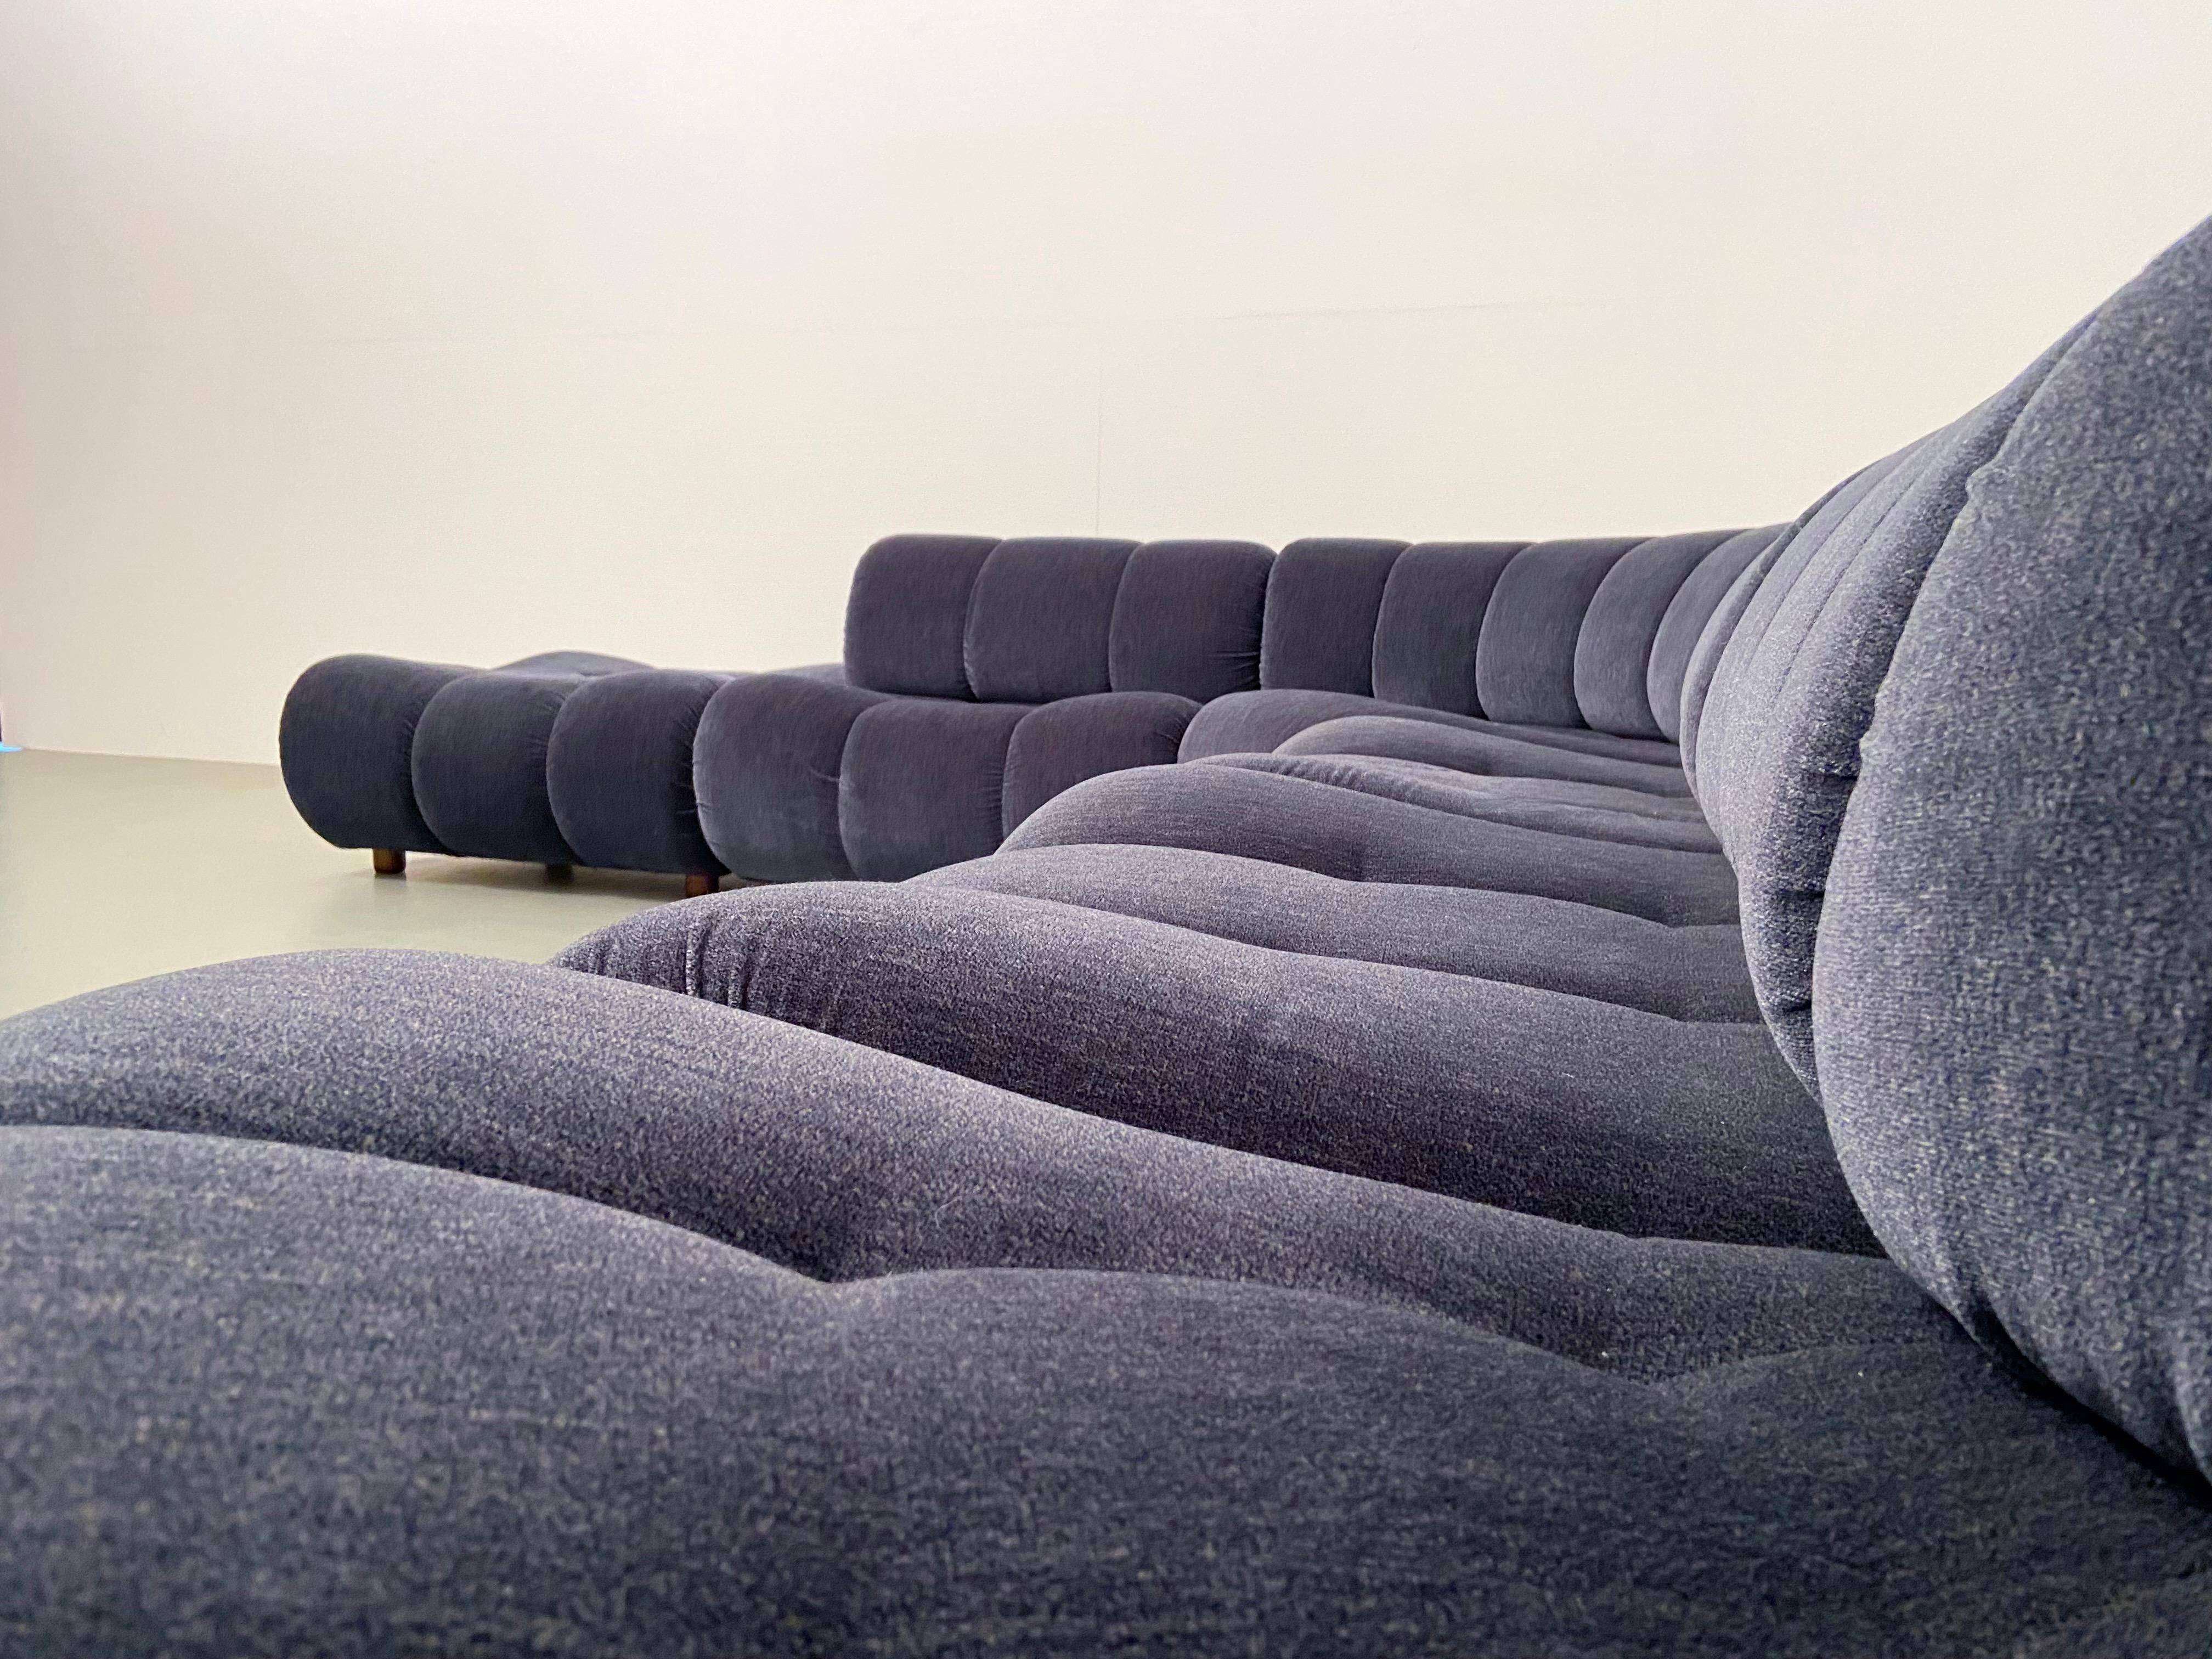 Large Modular Sofa by Giuseppe Munari for Poltrona Munari, Italy, 1970's In Good Condition For Sale In Uithoorn, NL